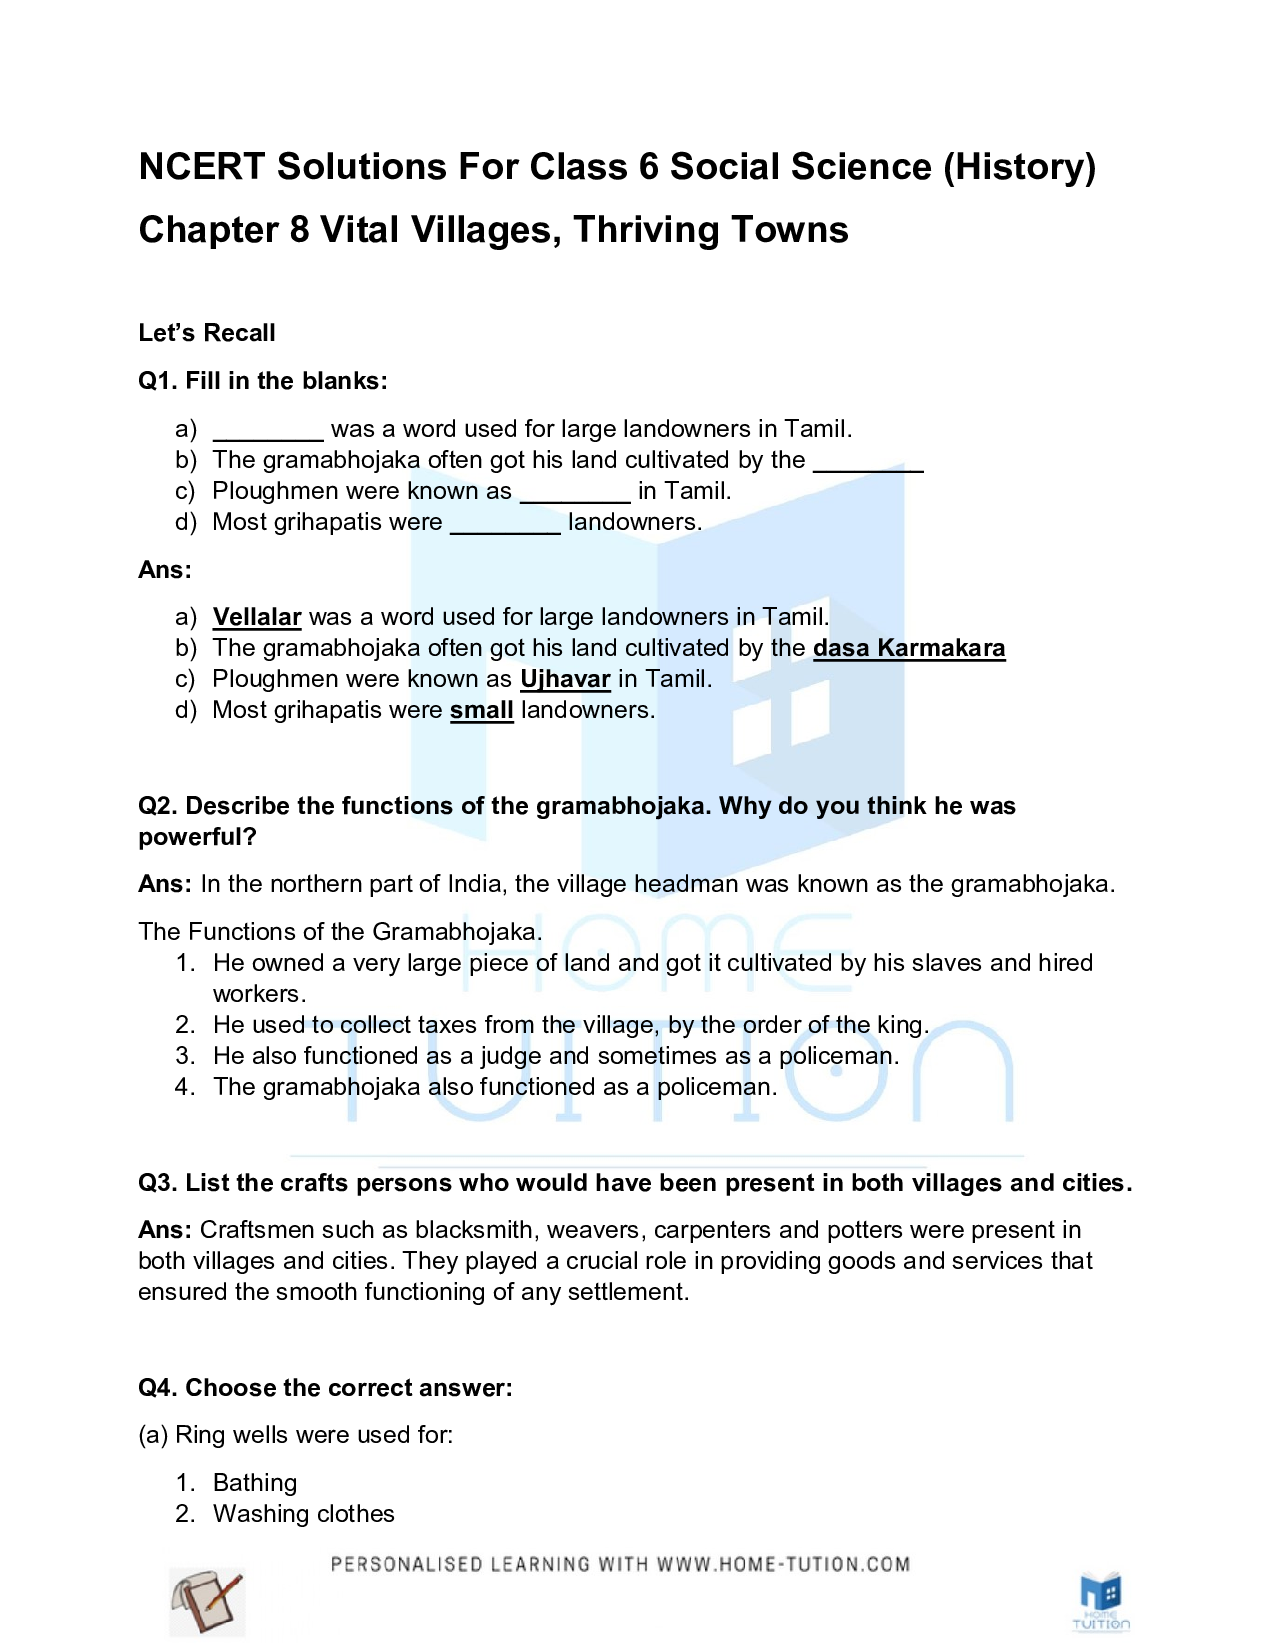 Chapter 8 Vital Villages, Thriving Towns